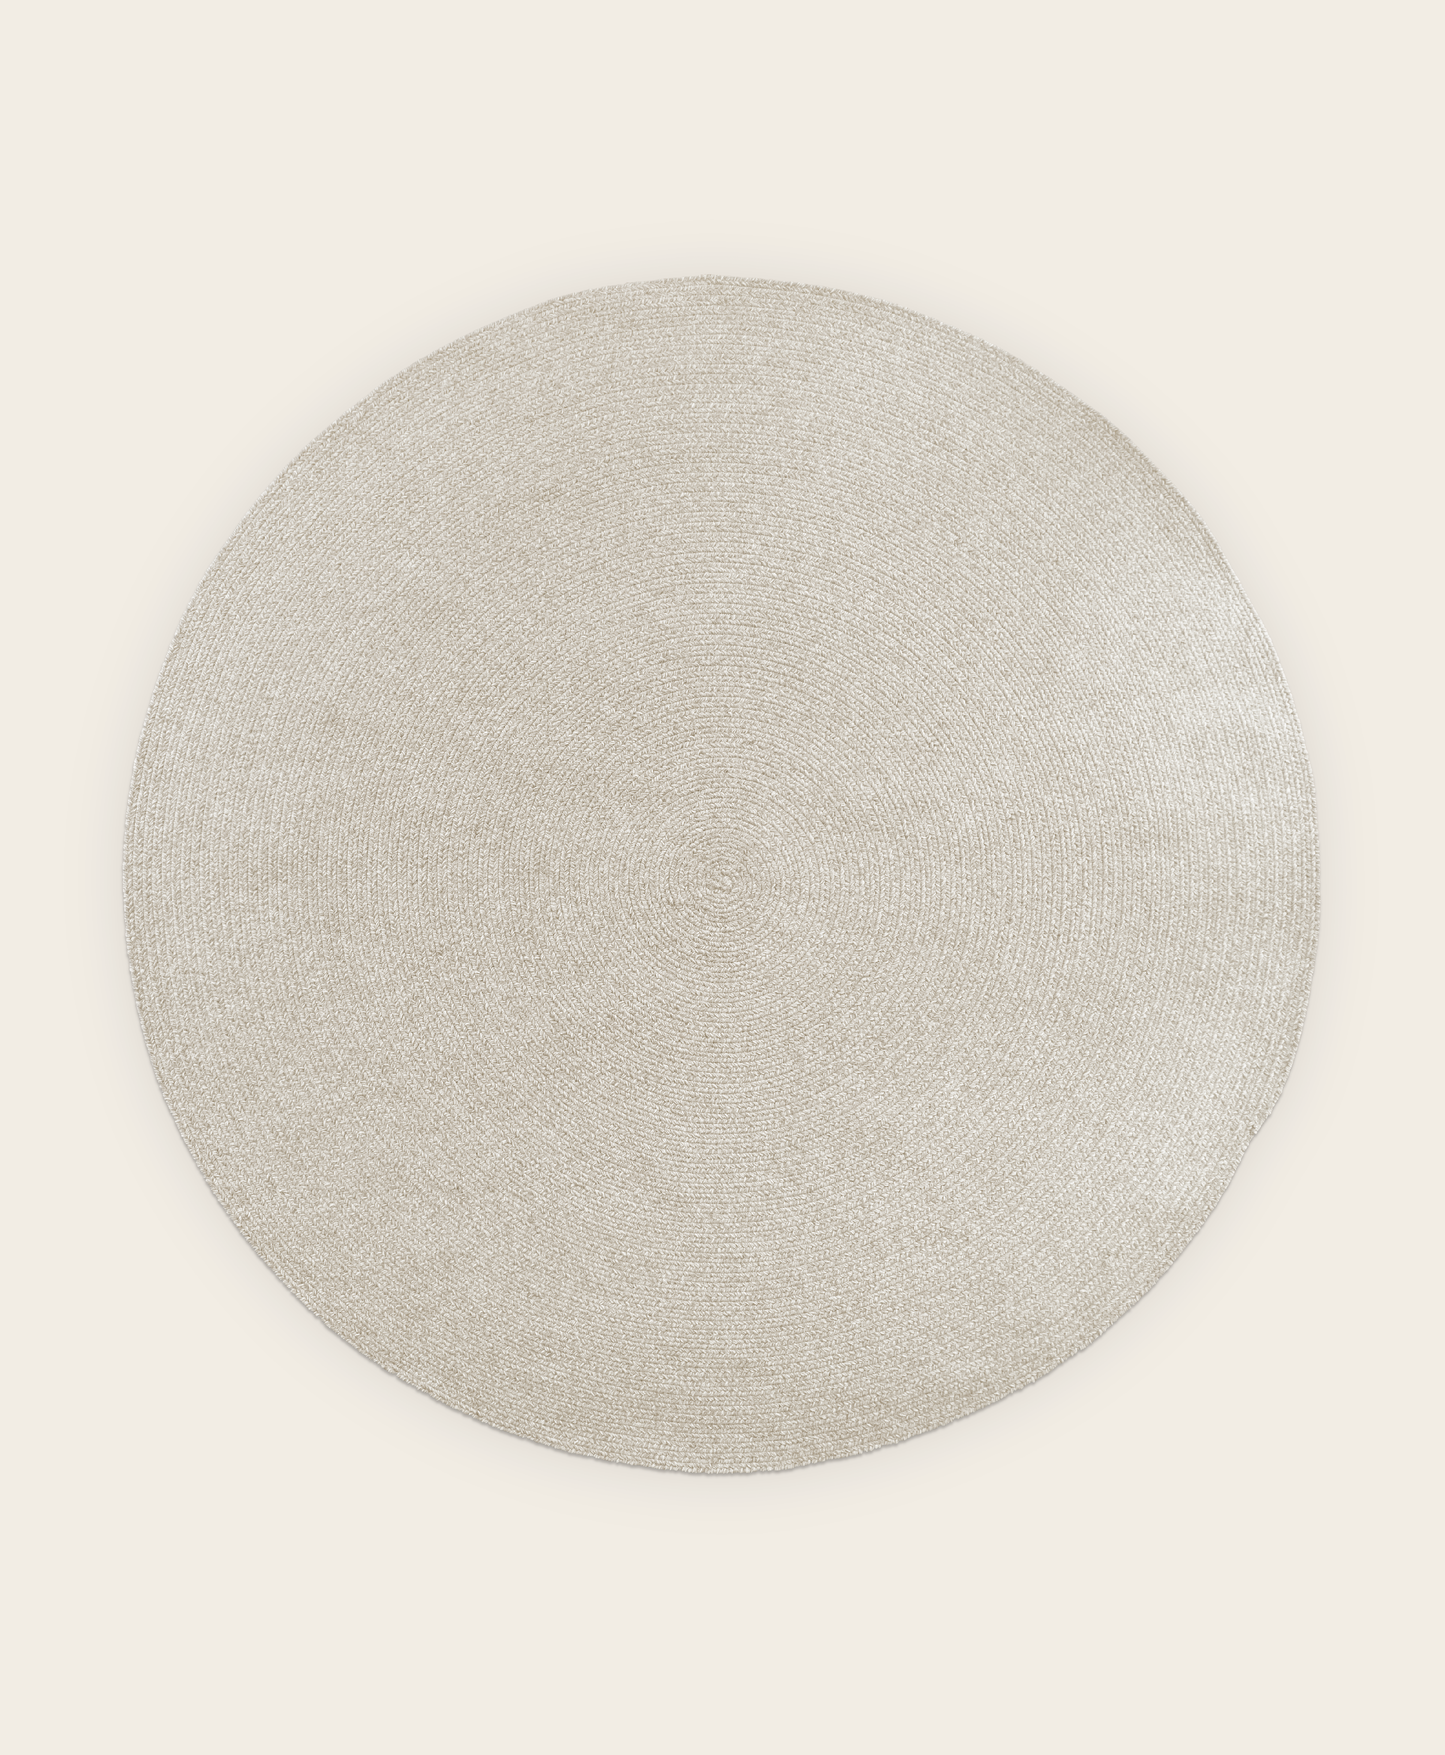 Sustainable wool area rug in circle shape, light grey